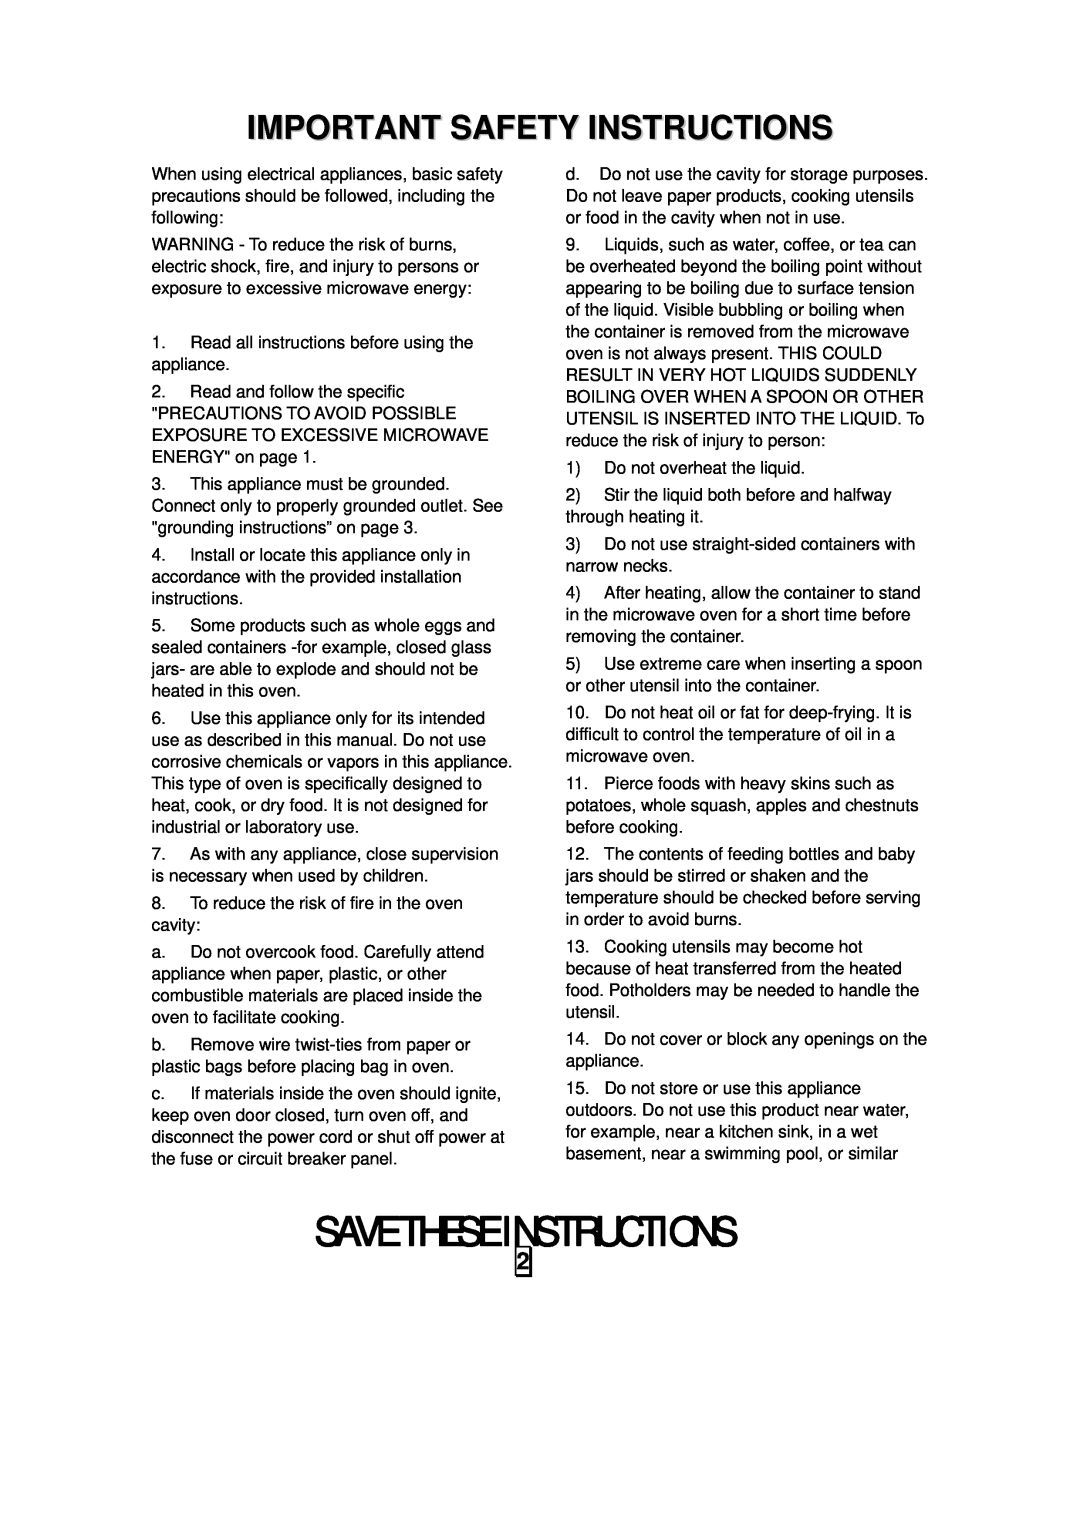 Sanyo EM-S7595S instruction manual Save These Instructions, Important Safety Instructions 